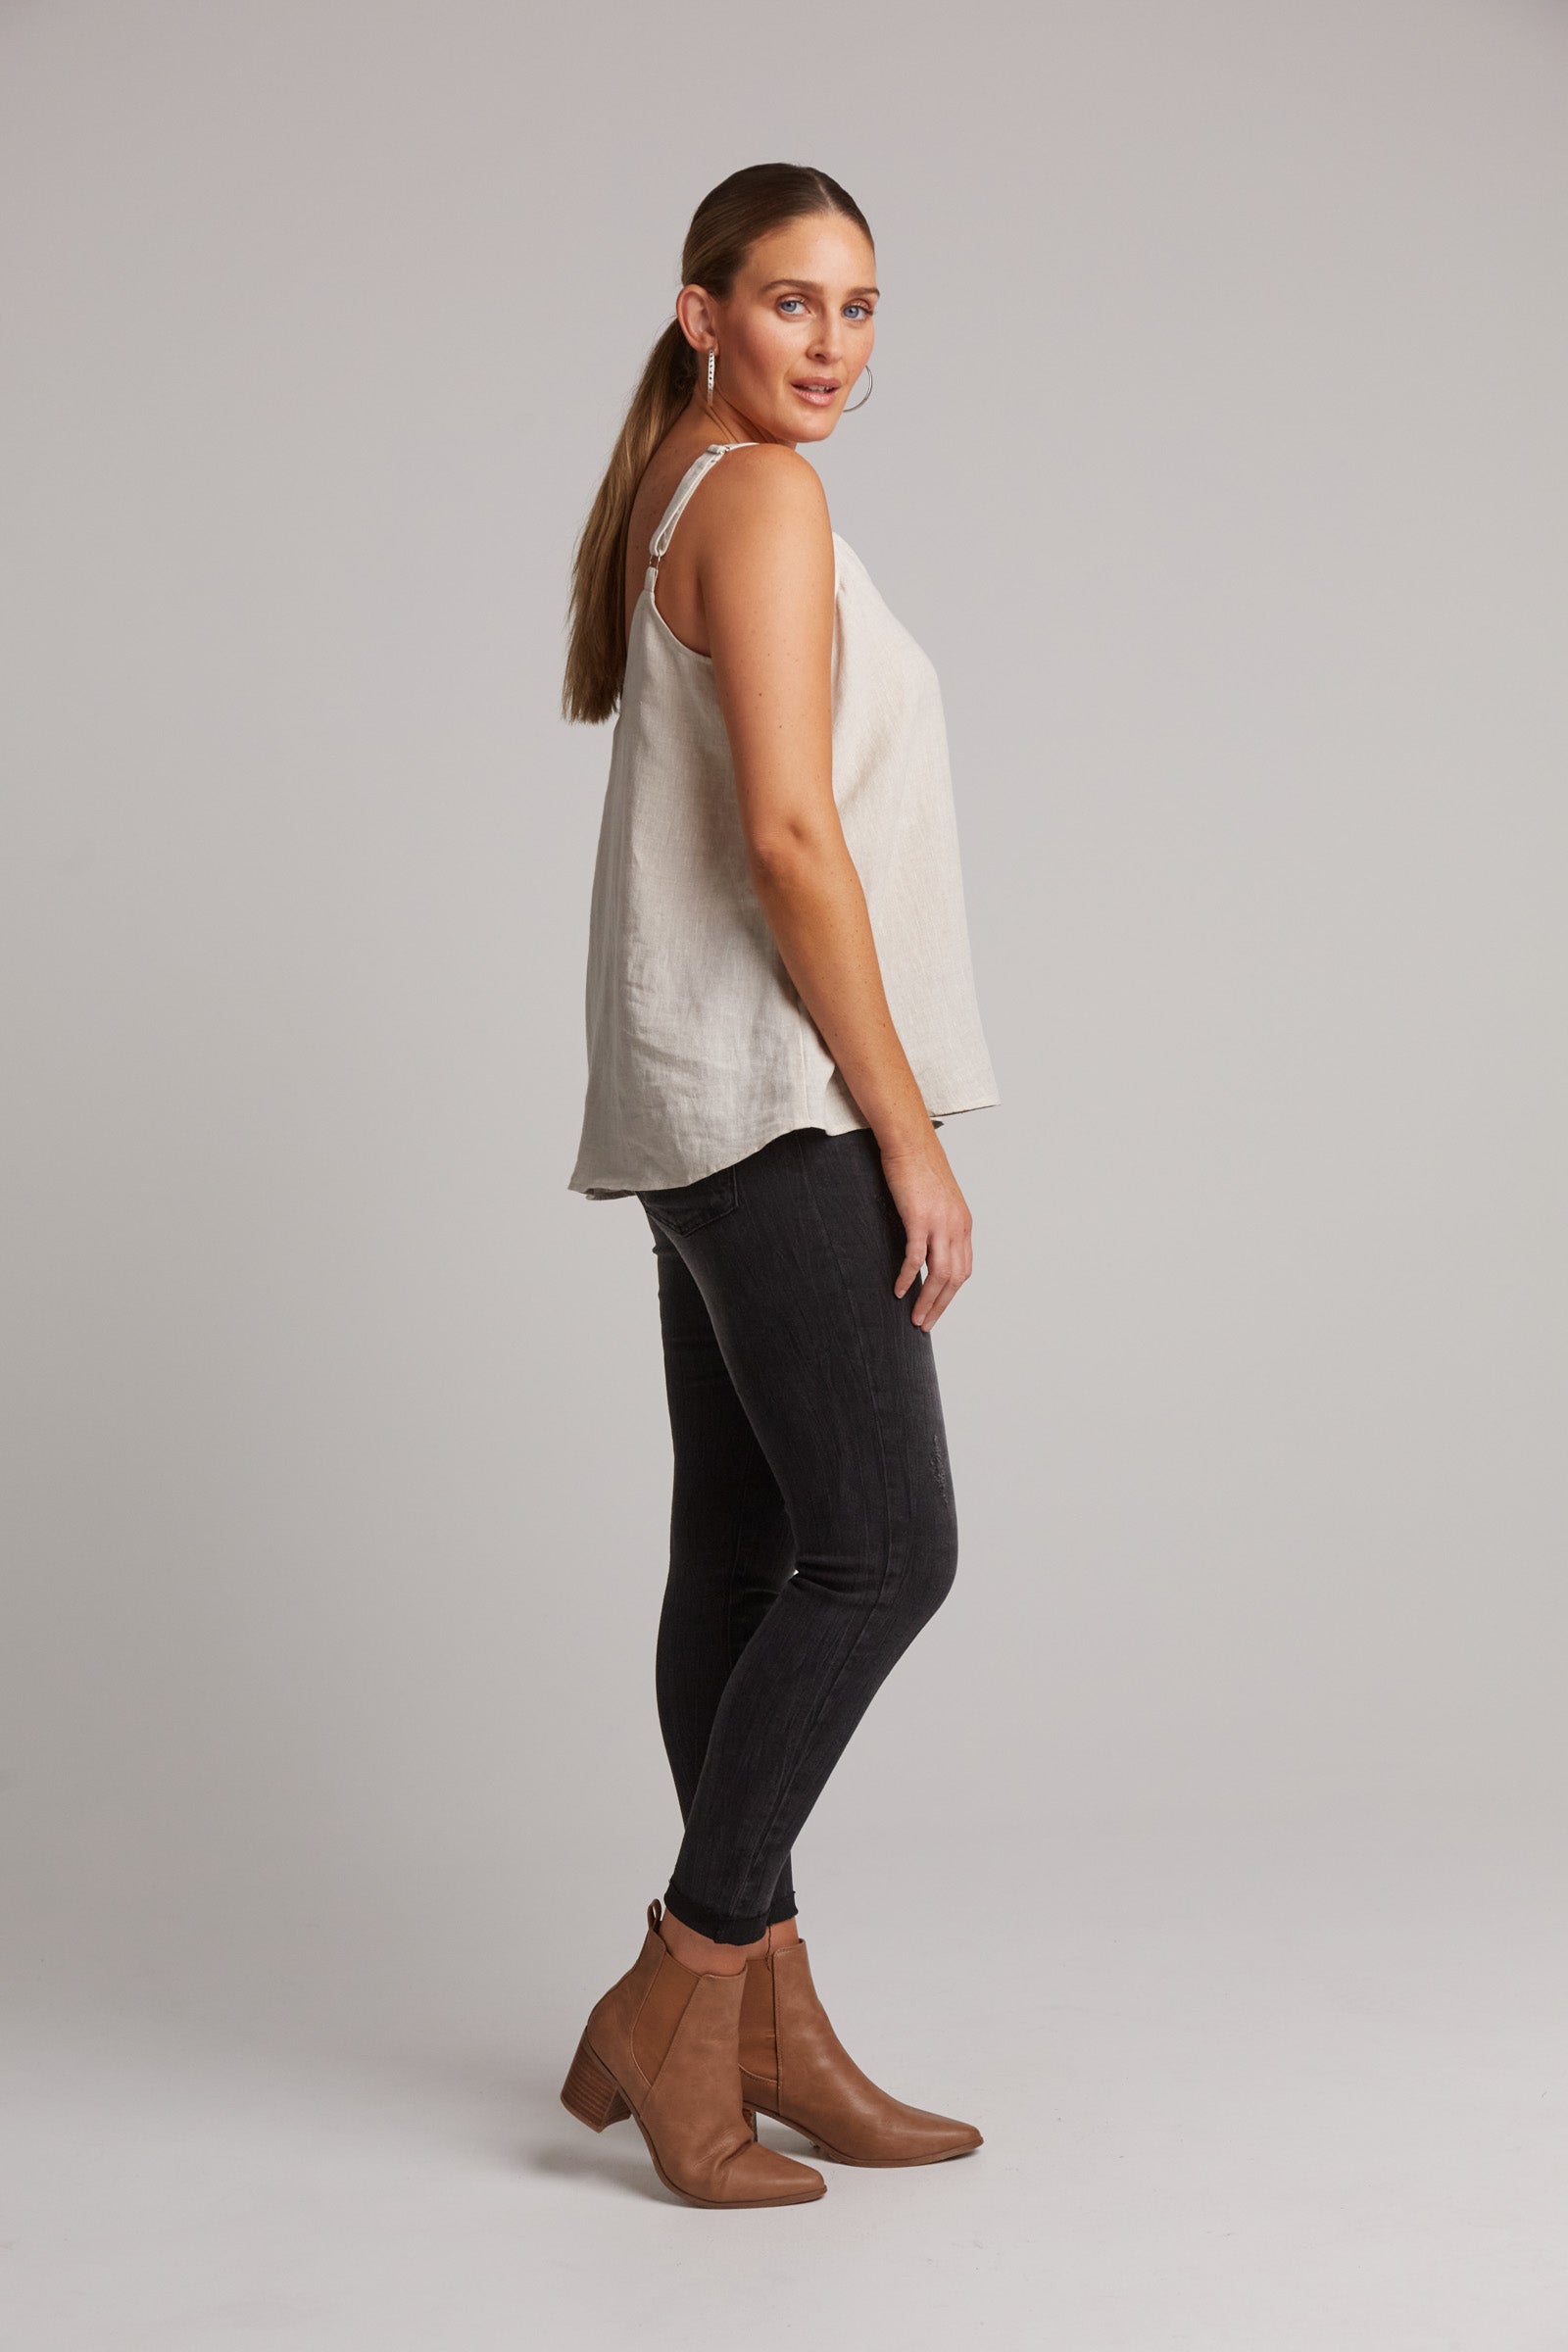 Studio Tank - Tusk - eb&ive Clothing - Top Strappy Linen